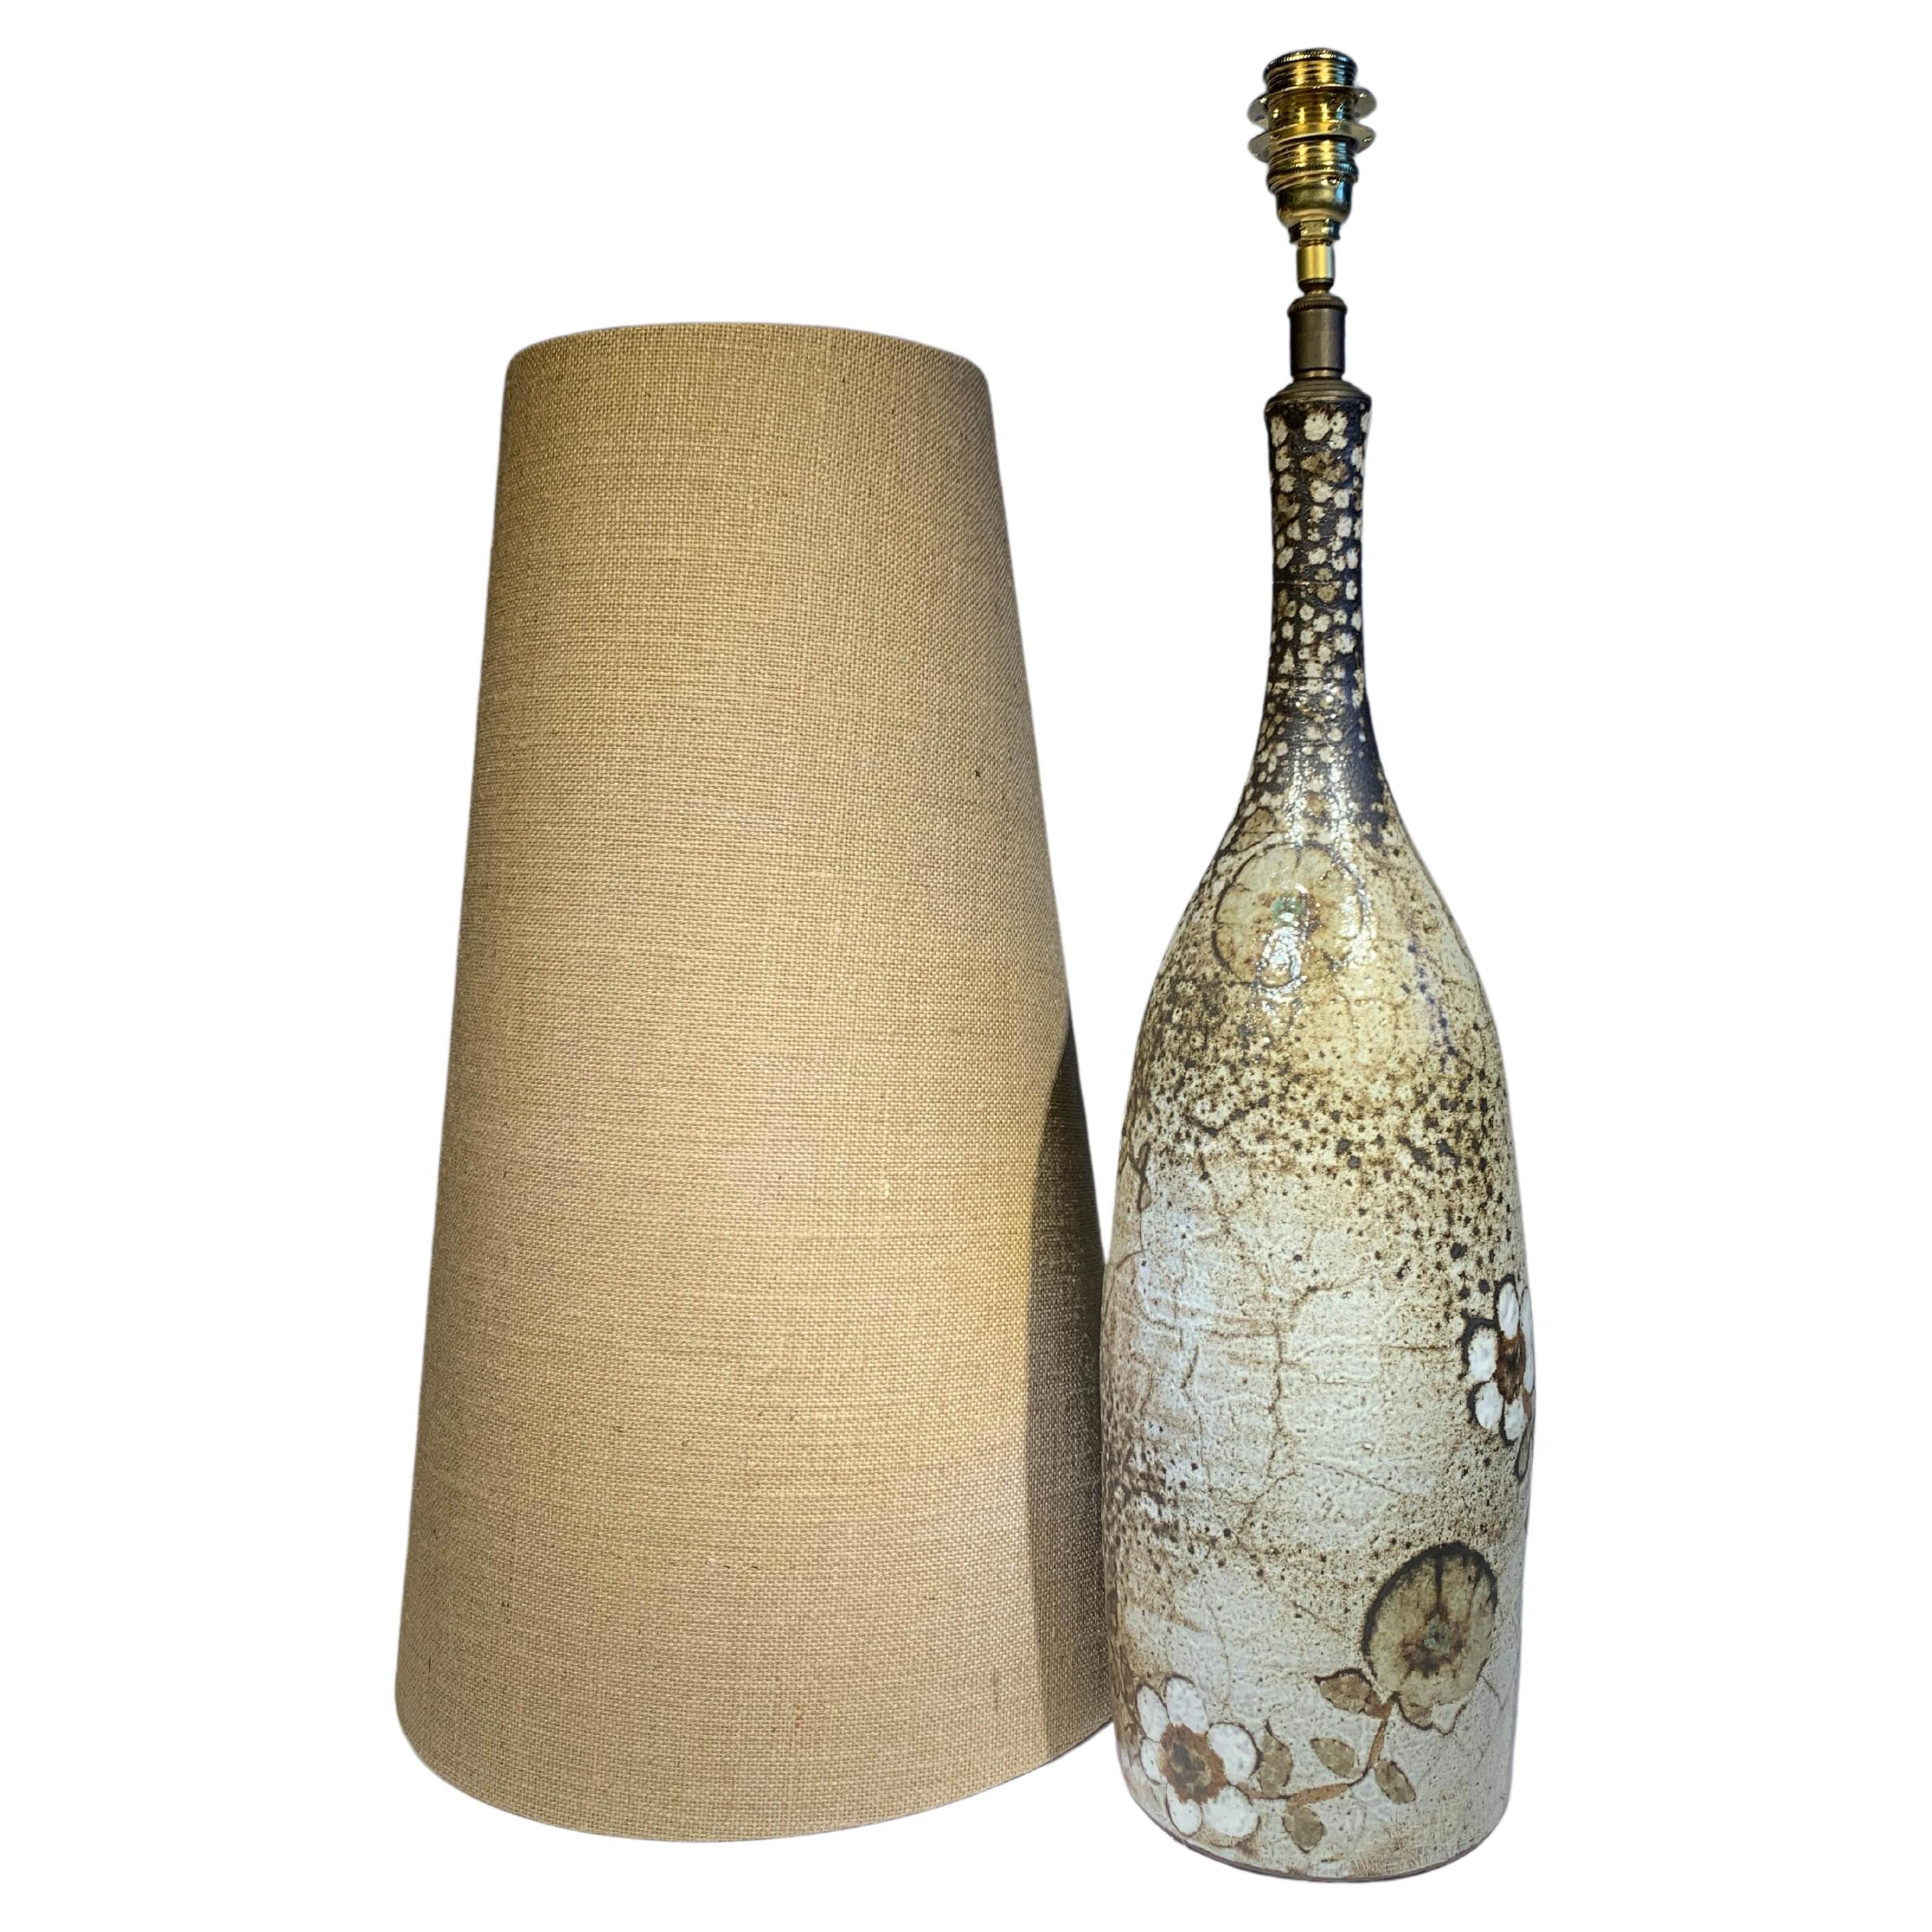 Paul Quere French ceramic table lamp